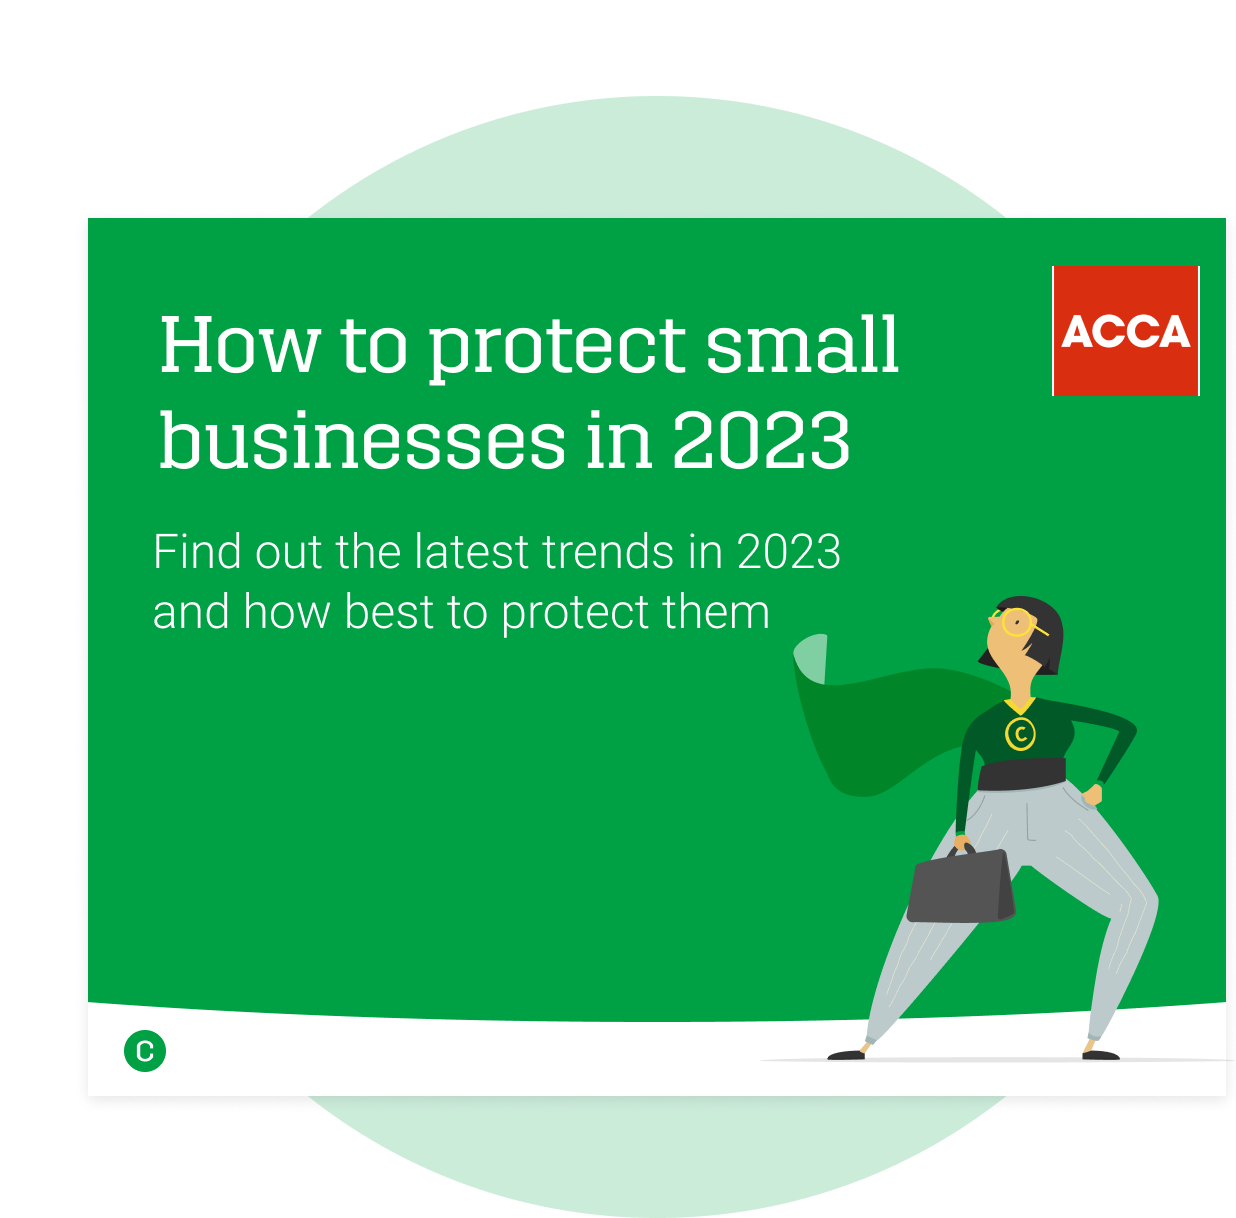 How to protect small businesses in 2023